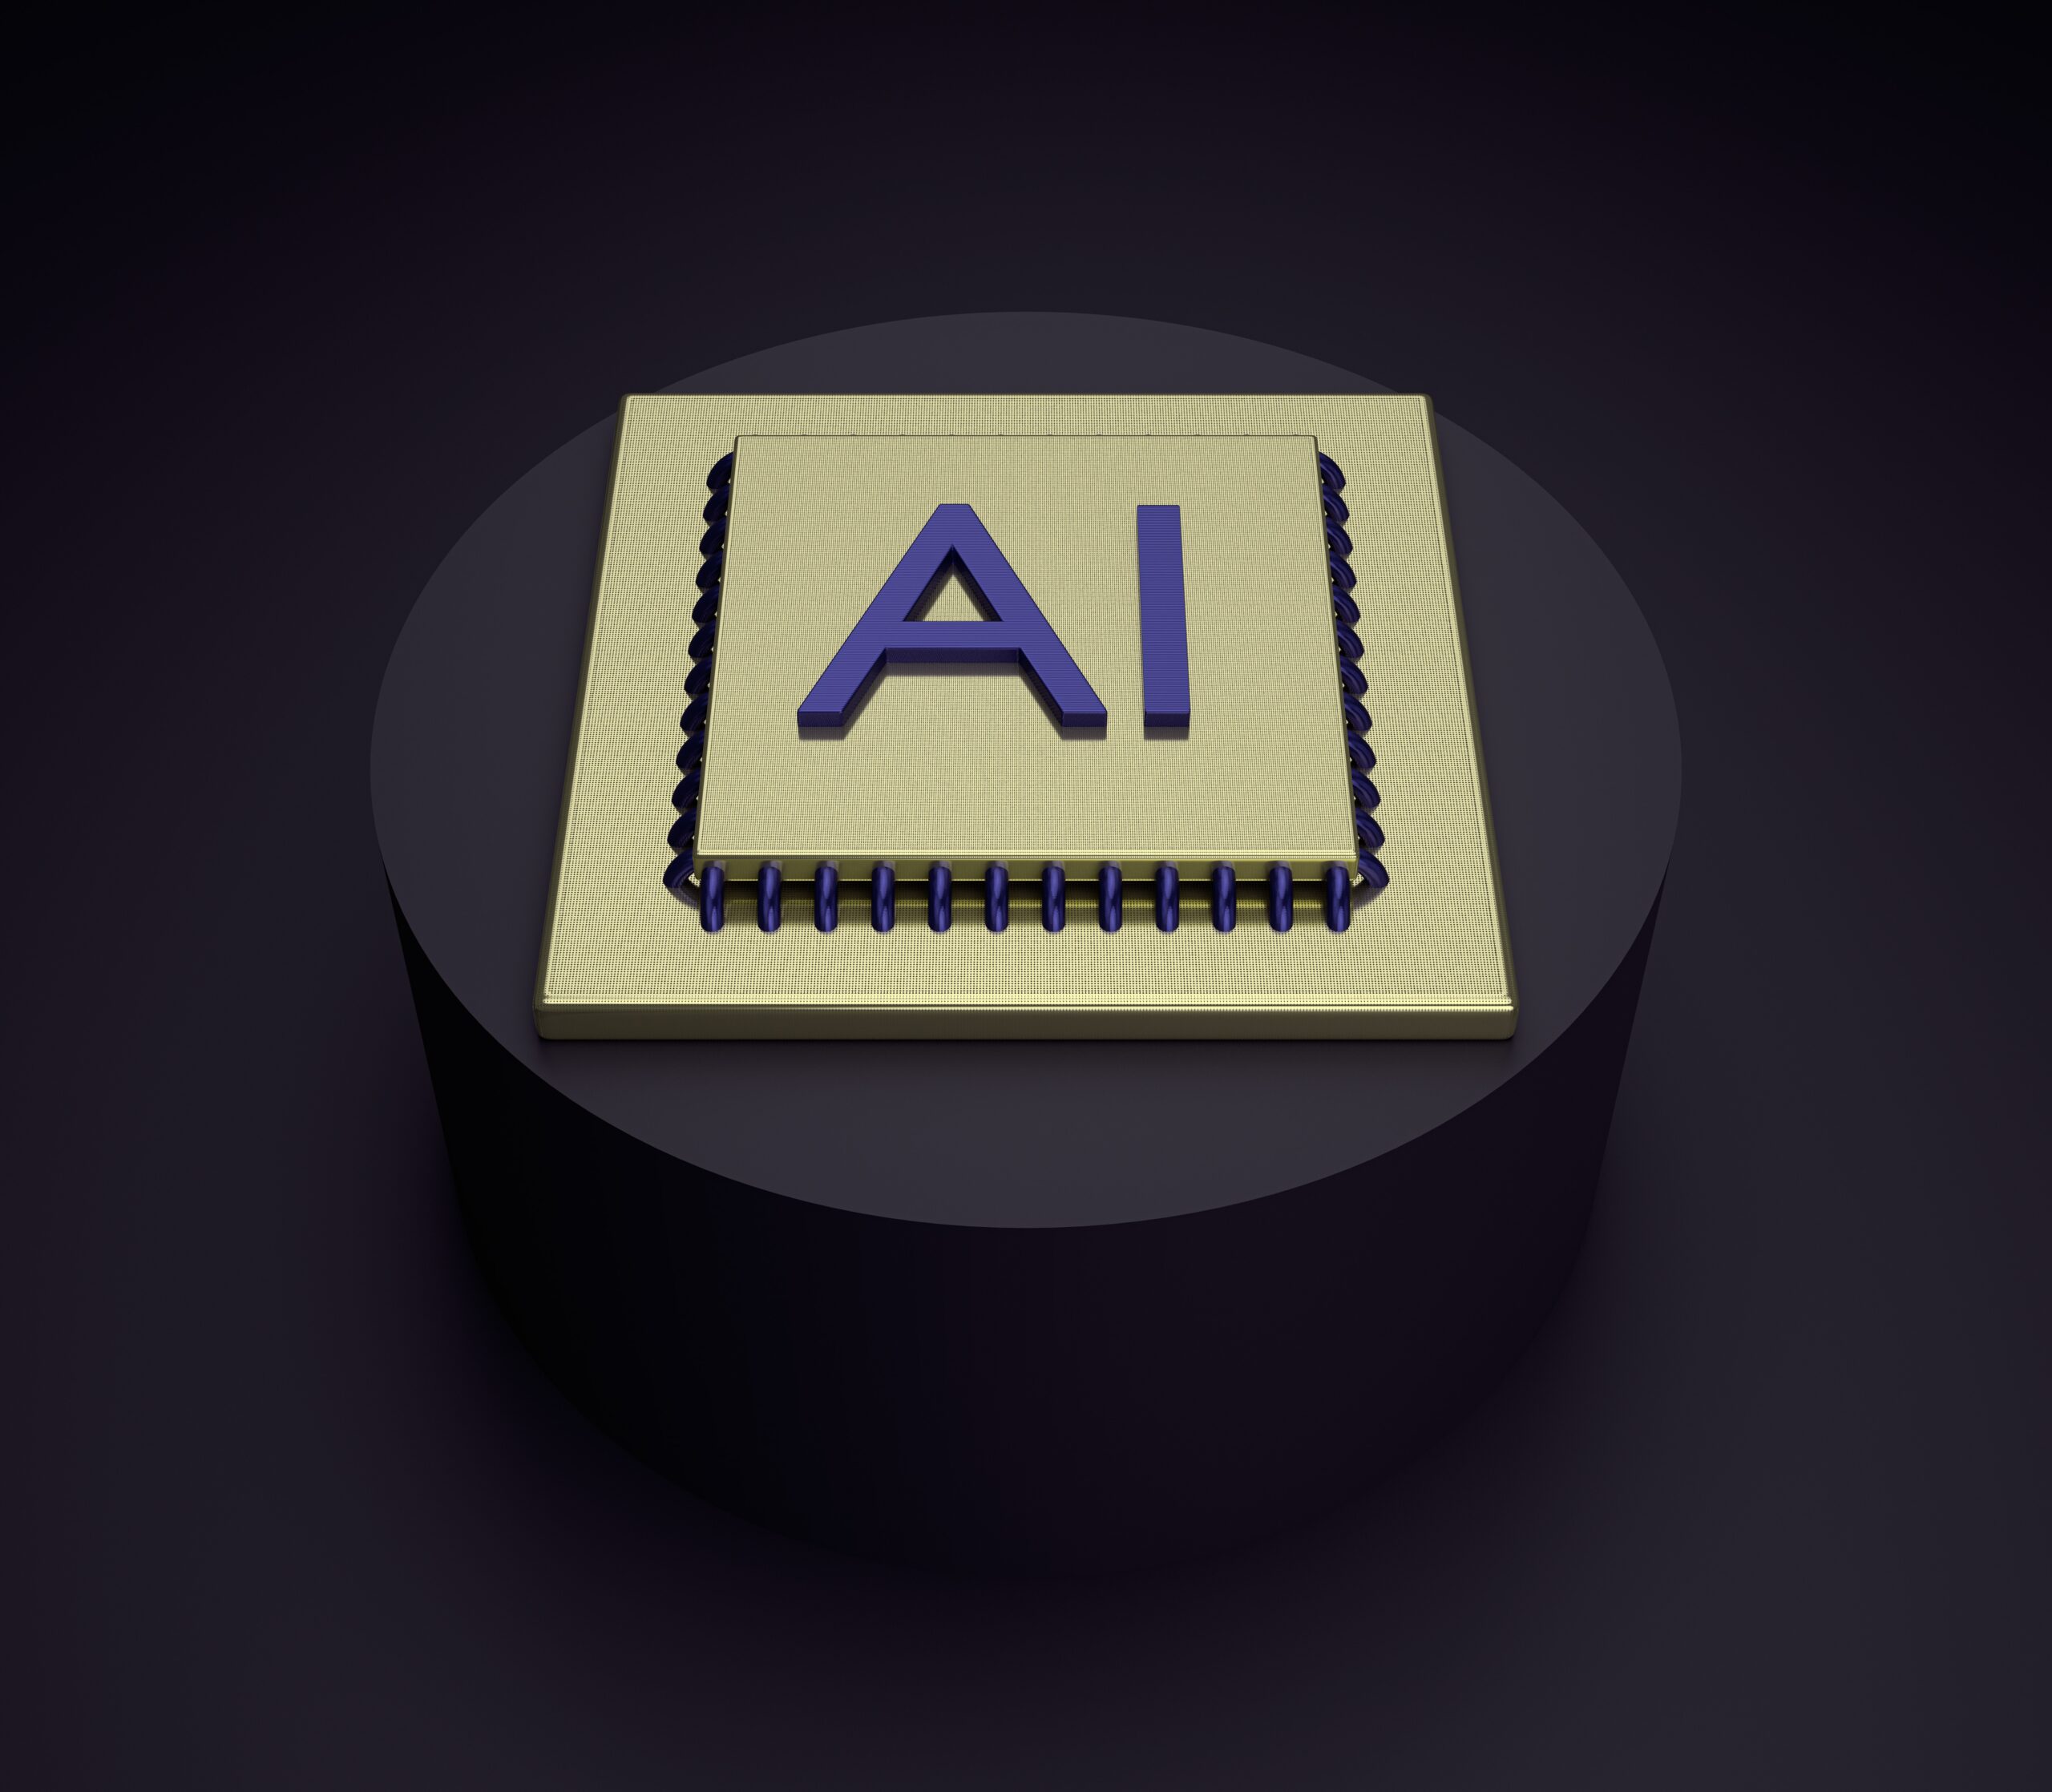 Image of a computer chip with "AI" printed on it